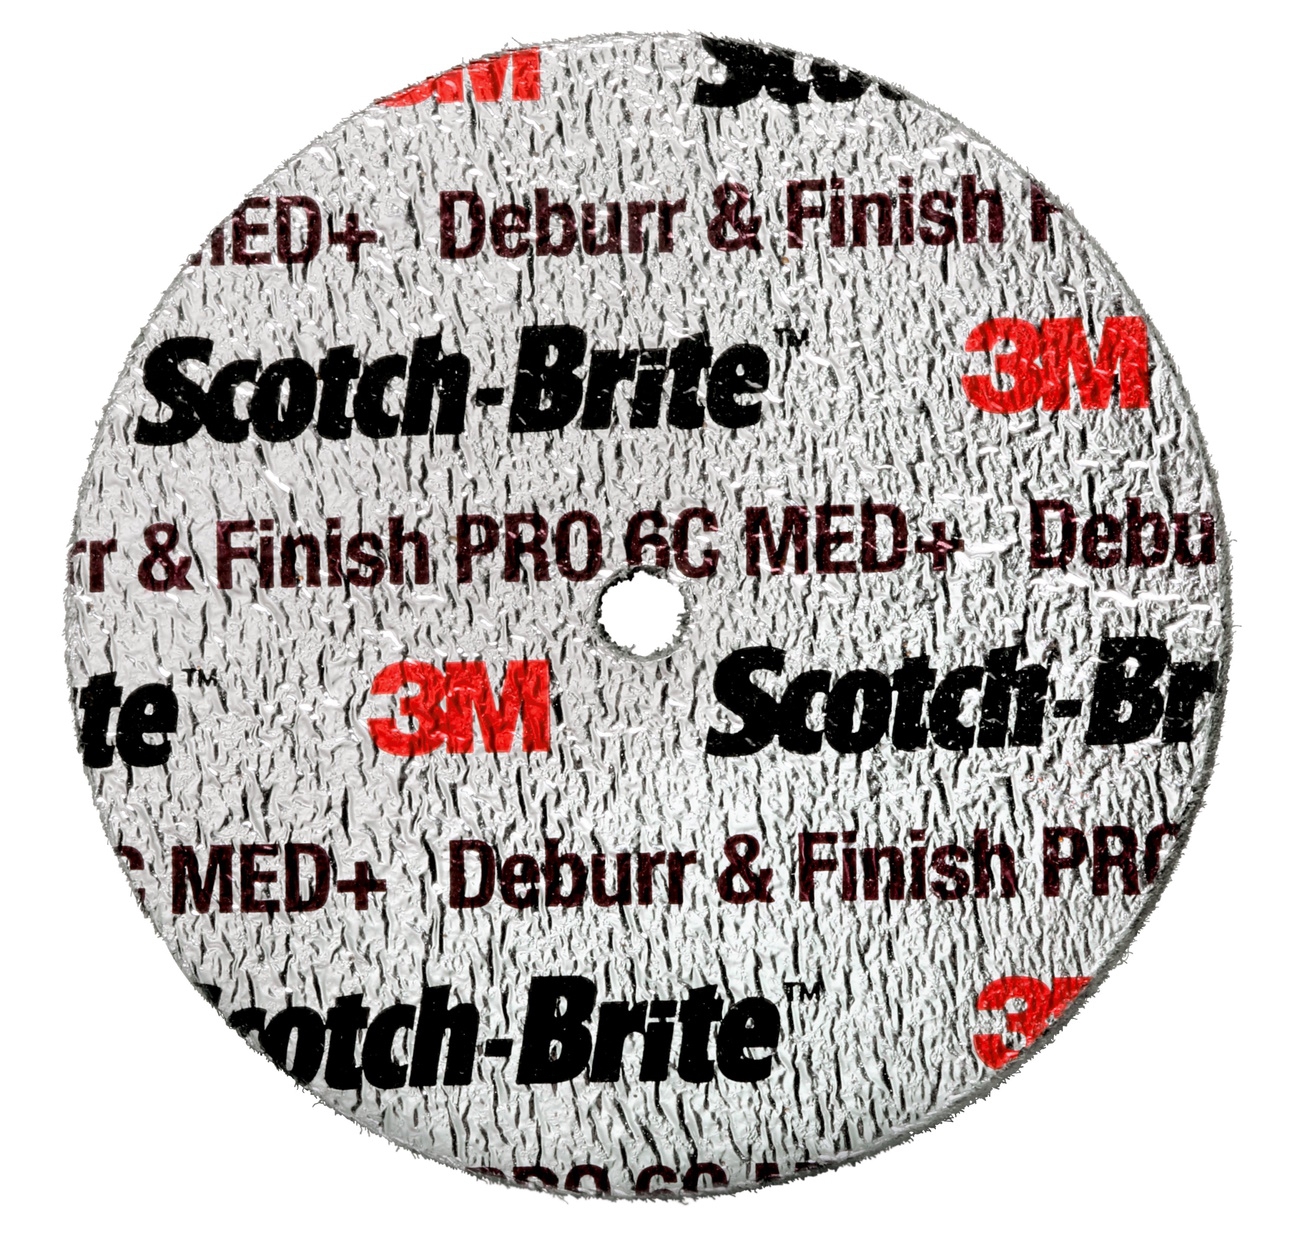  3M Scotch-Brite Deburr and Finish PRO -kompaktlevy DP-UW, 75 mm x 3,18 mm x 6,35 mm, 6C MED+